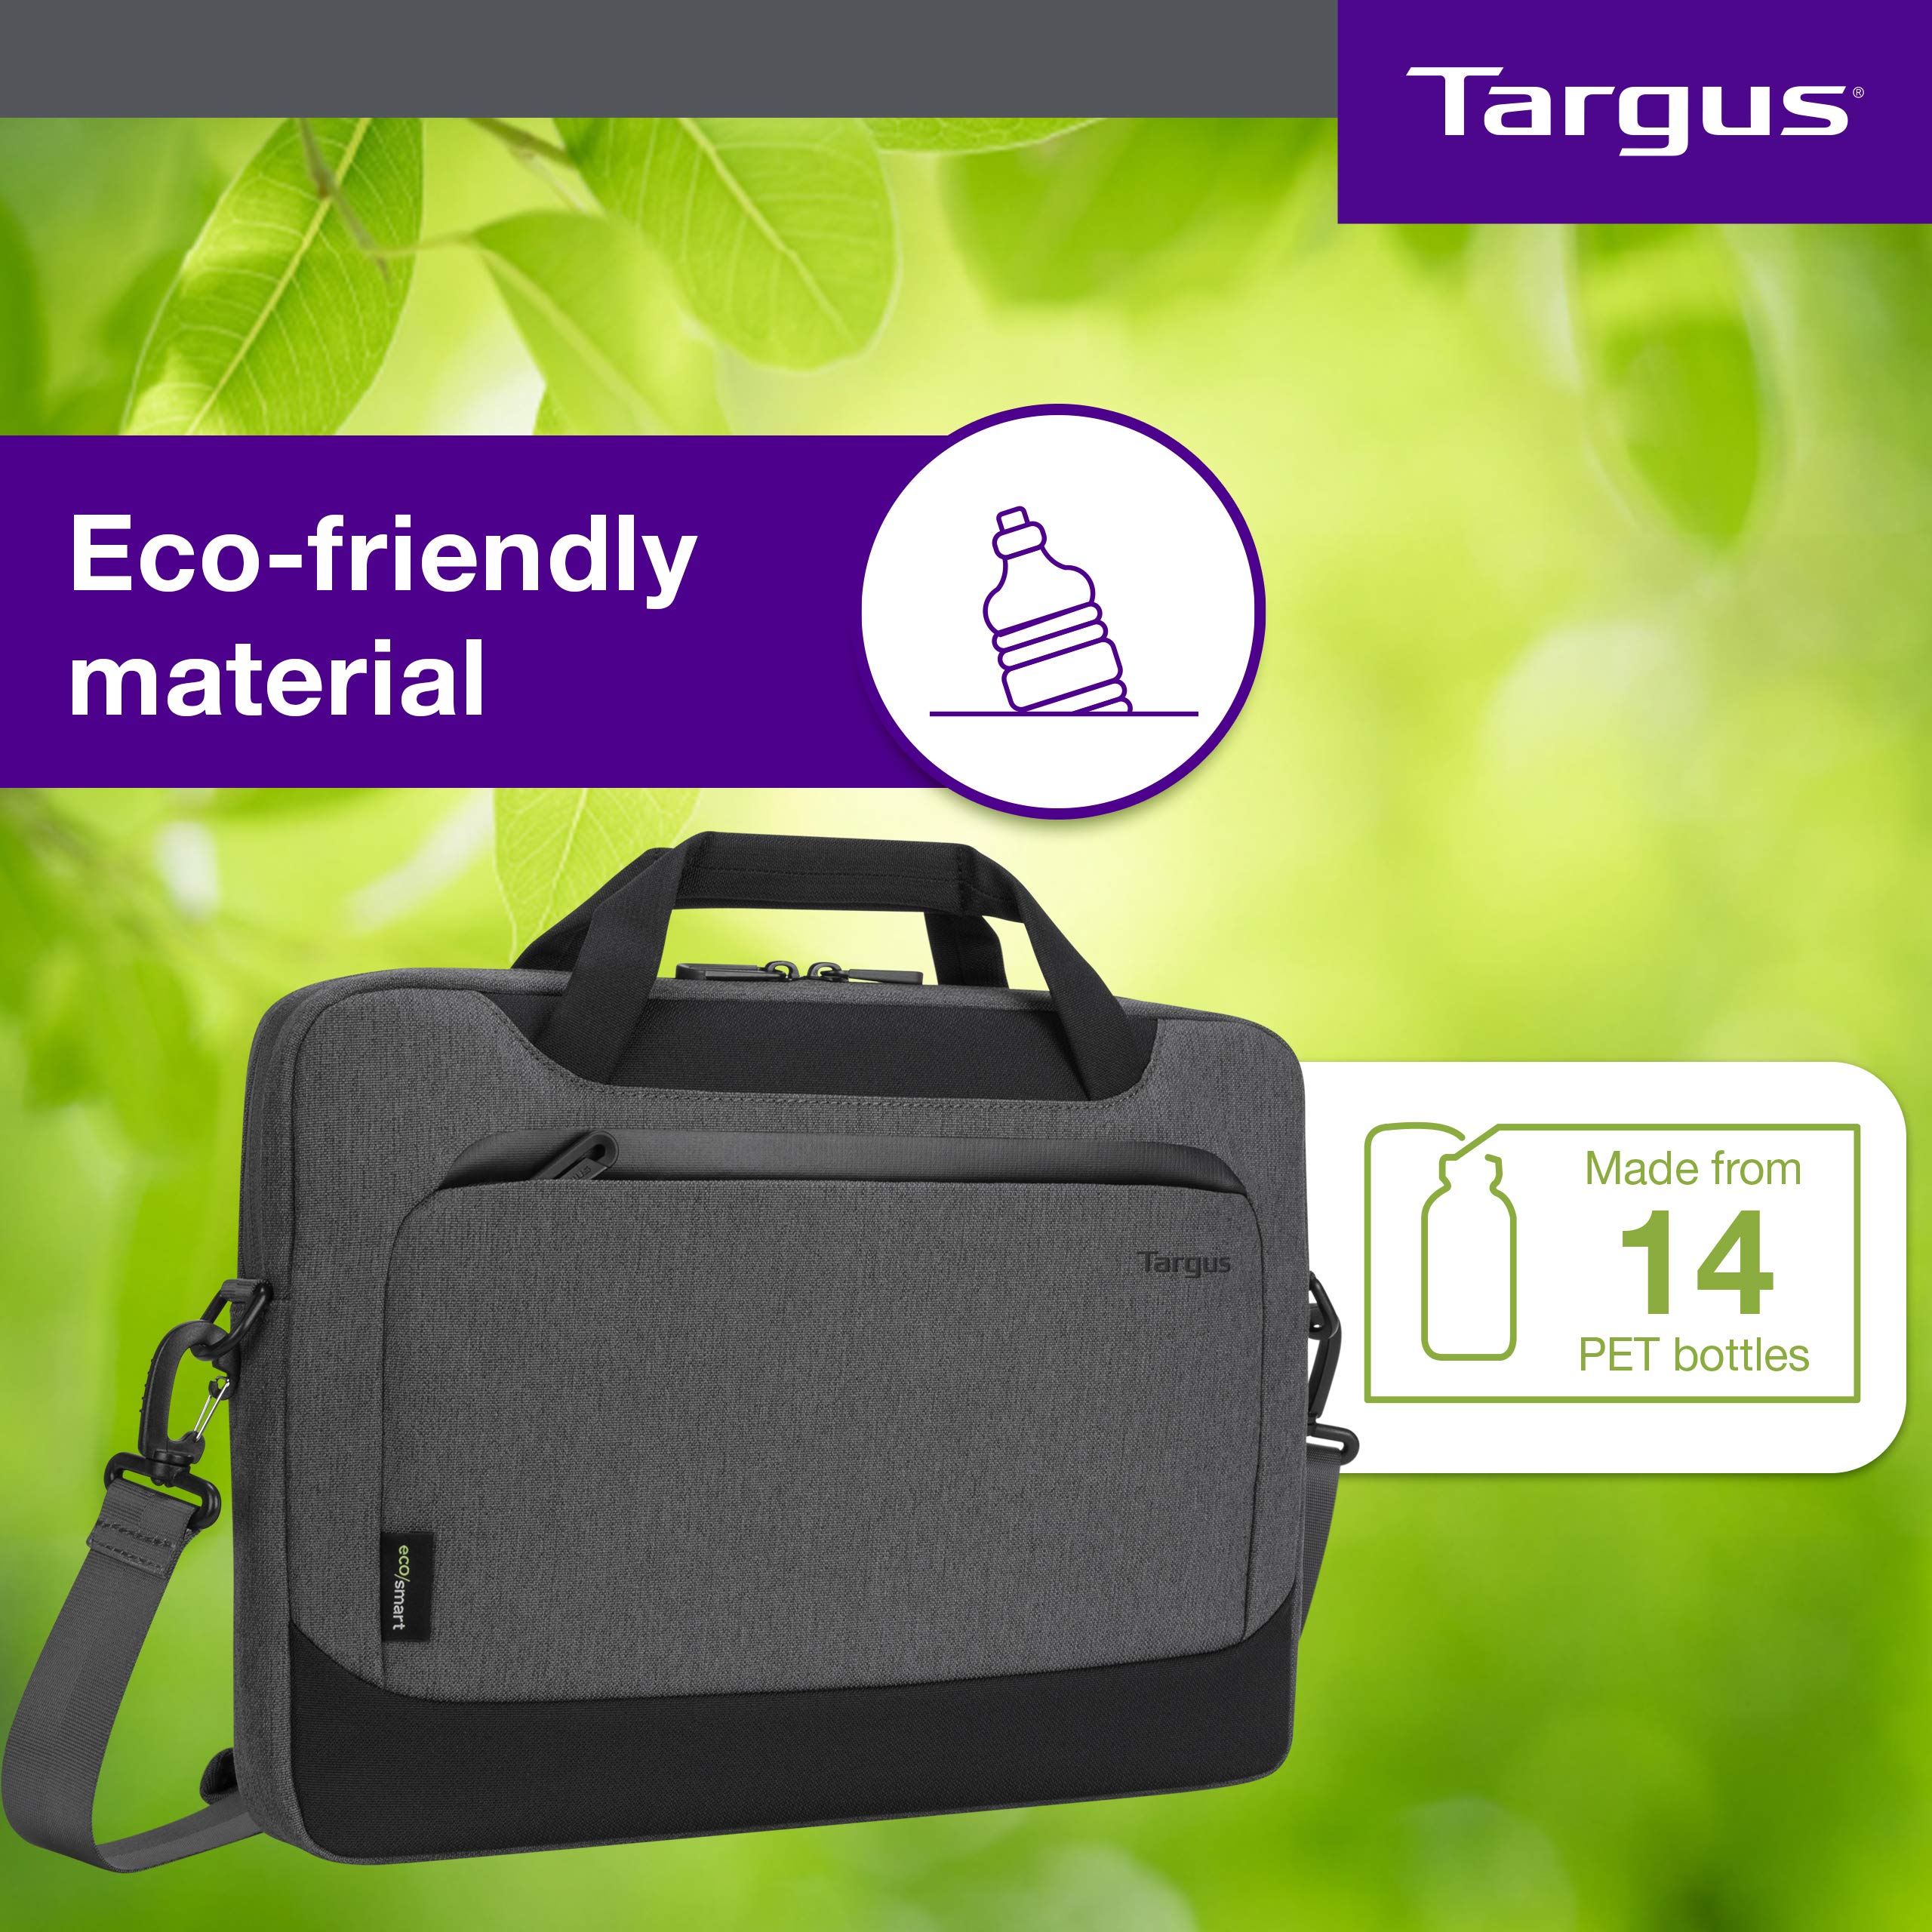 Targus Cypress Slimcase with EcoSmart Designed for Business Traveler and School fit up to 15.6-Inch Laptop/Notebook, Light Gray (TBS92602GL)